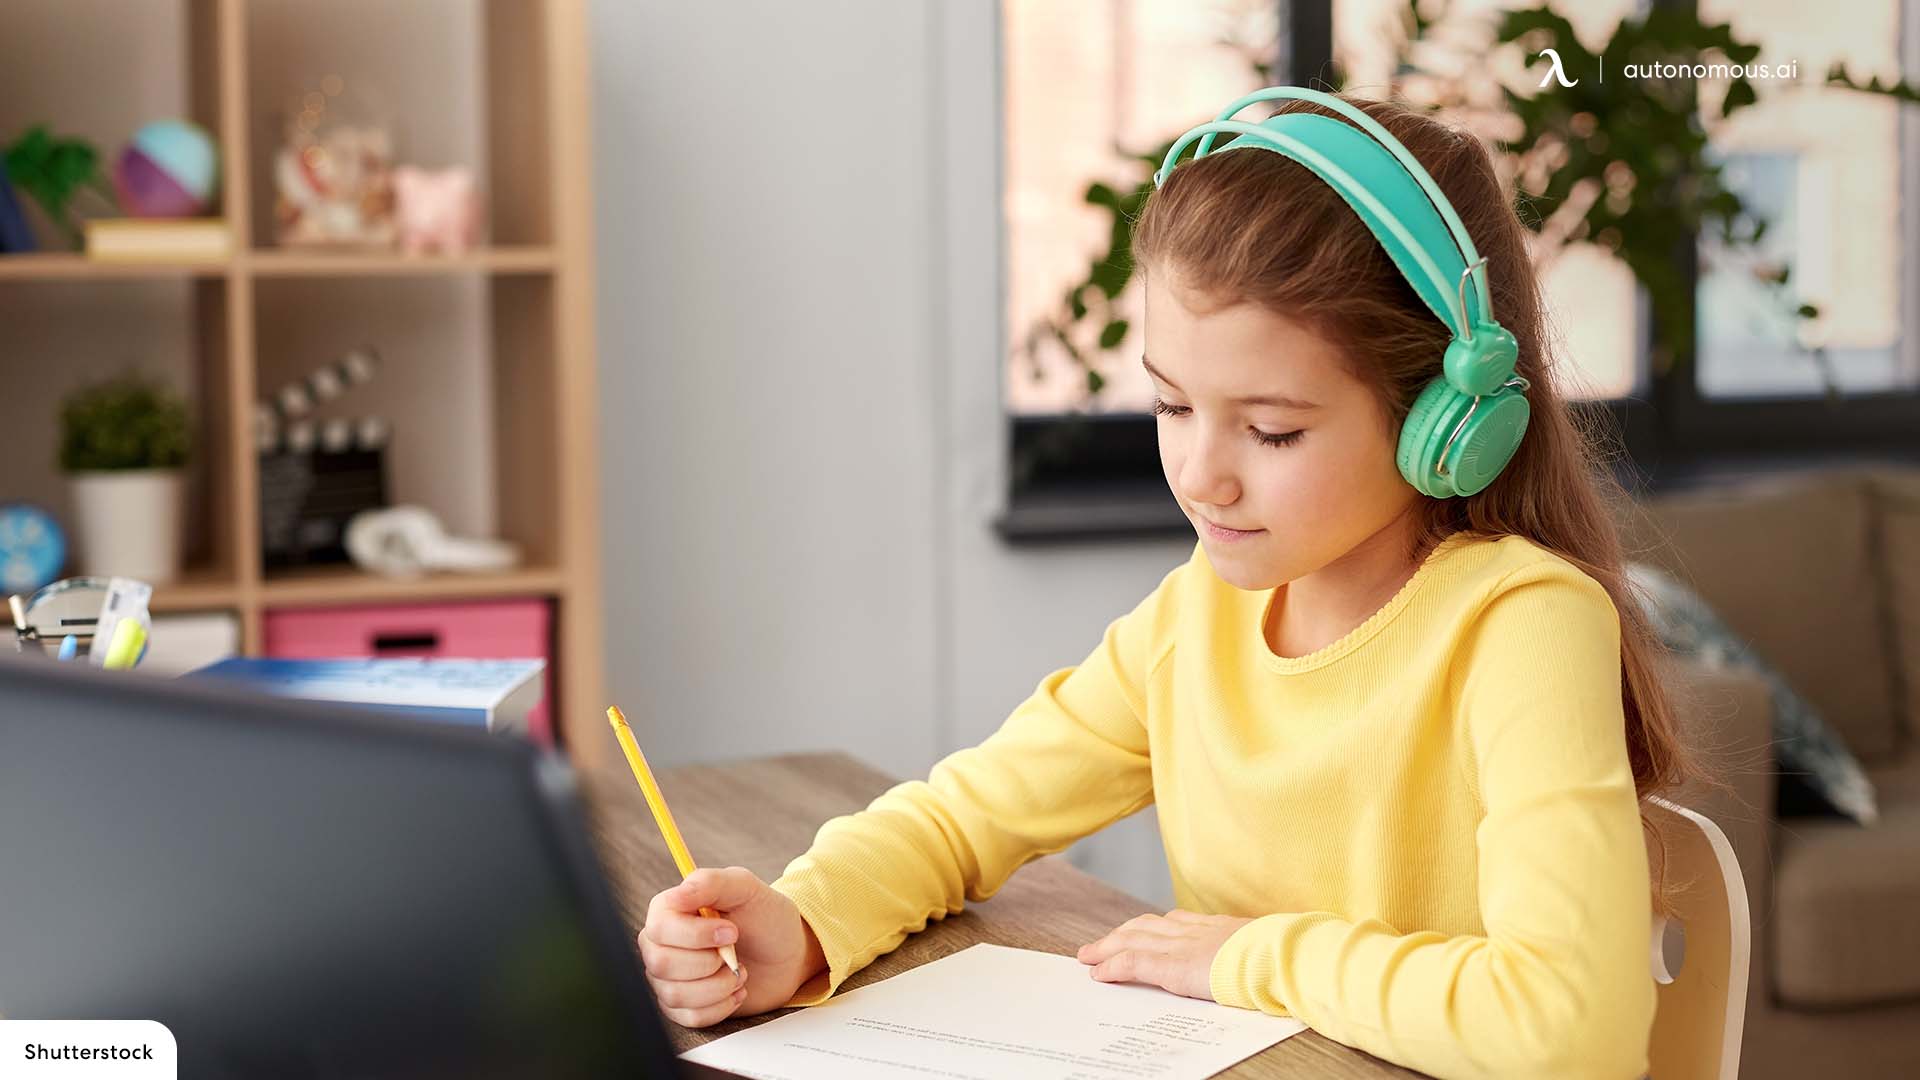 Essentials for Building Remote Learning Setup for Your Kids